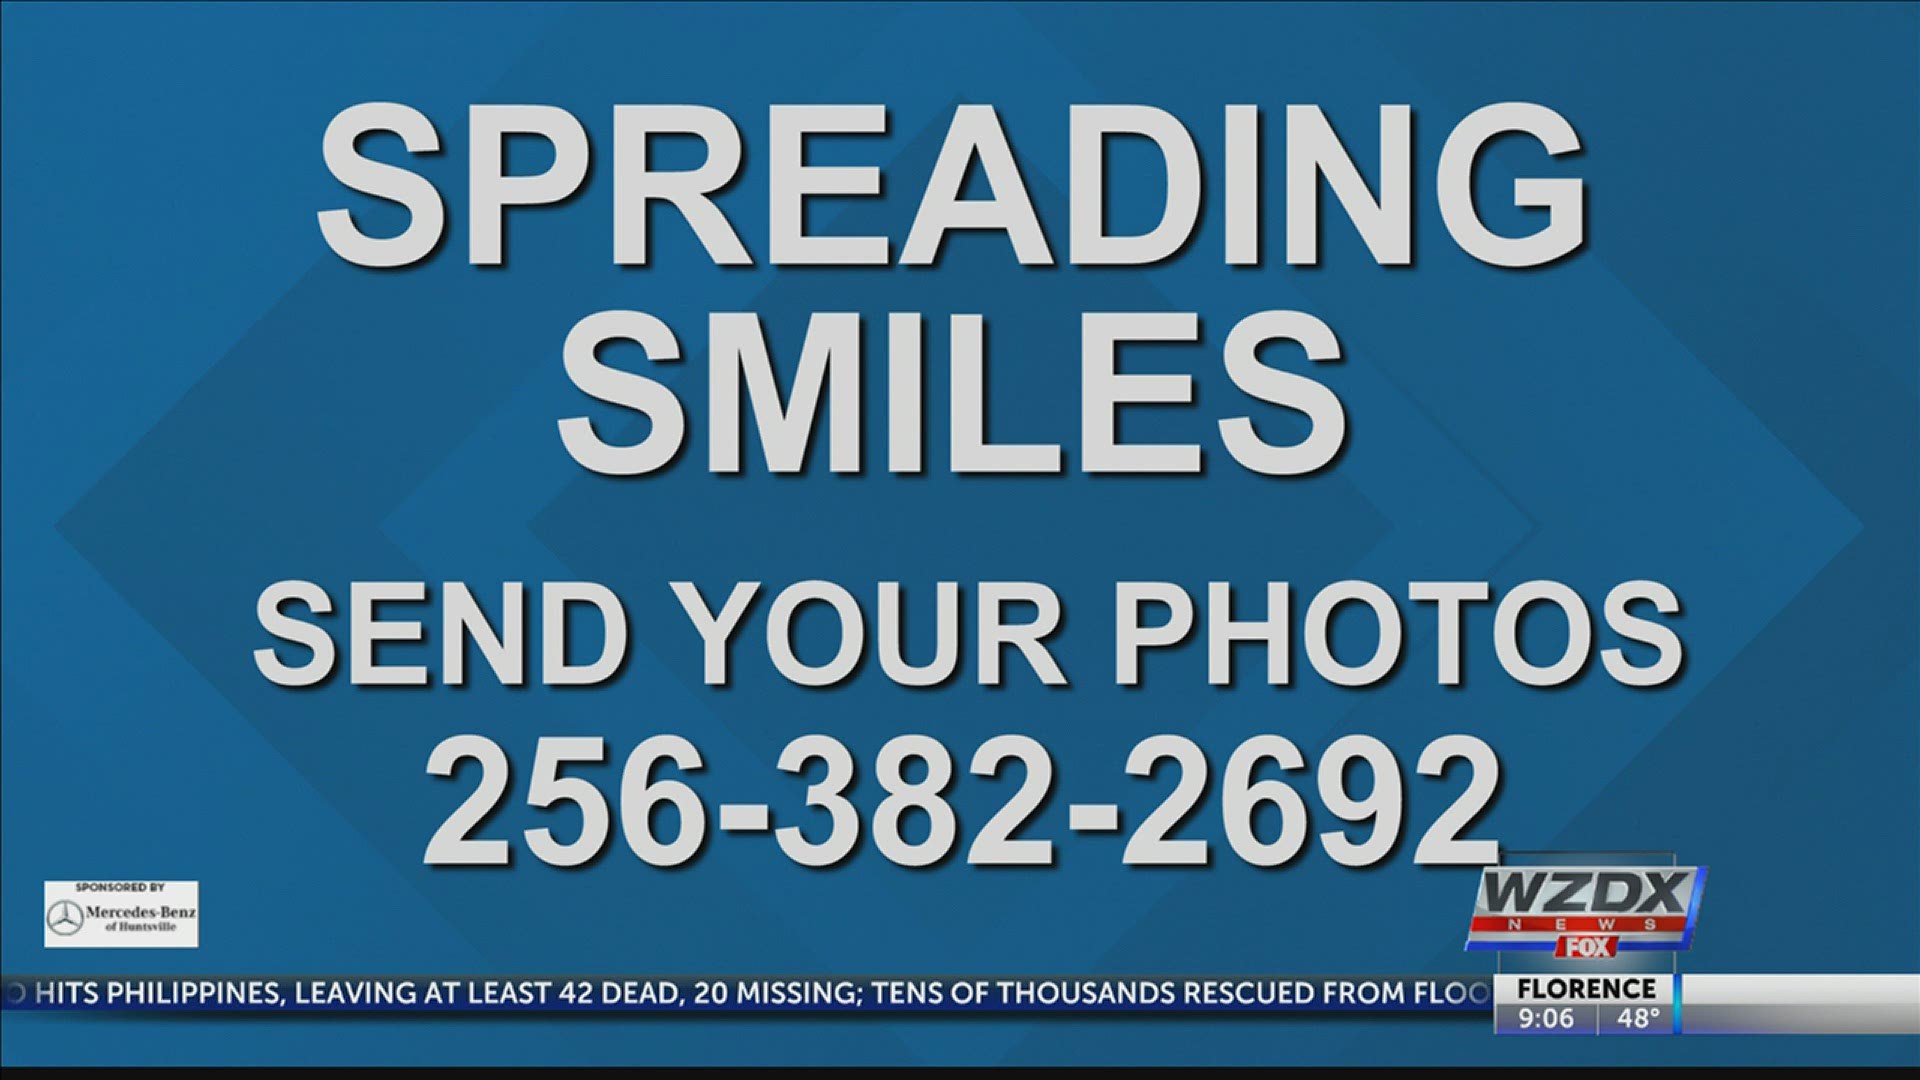 Show us how you're spreading smiles! Text your pics to (256)382-2692 or upload through the WZDX News app.